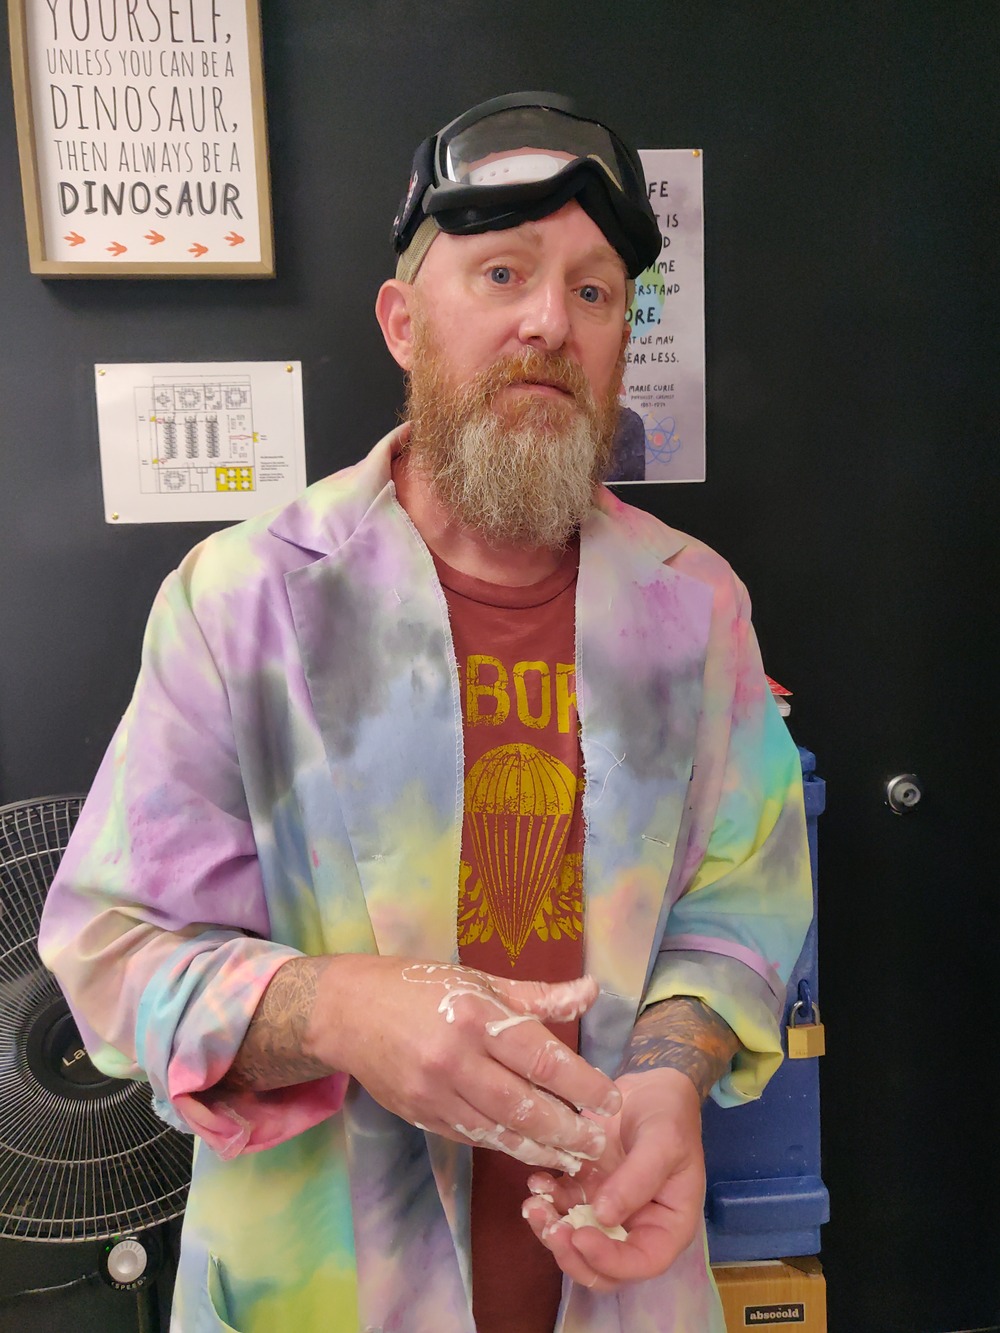 Brad standing with goo in his hands, googles on his head, wearing a tie-dye lab coat.